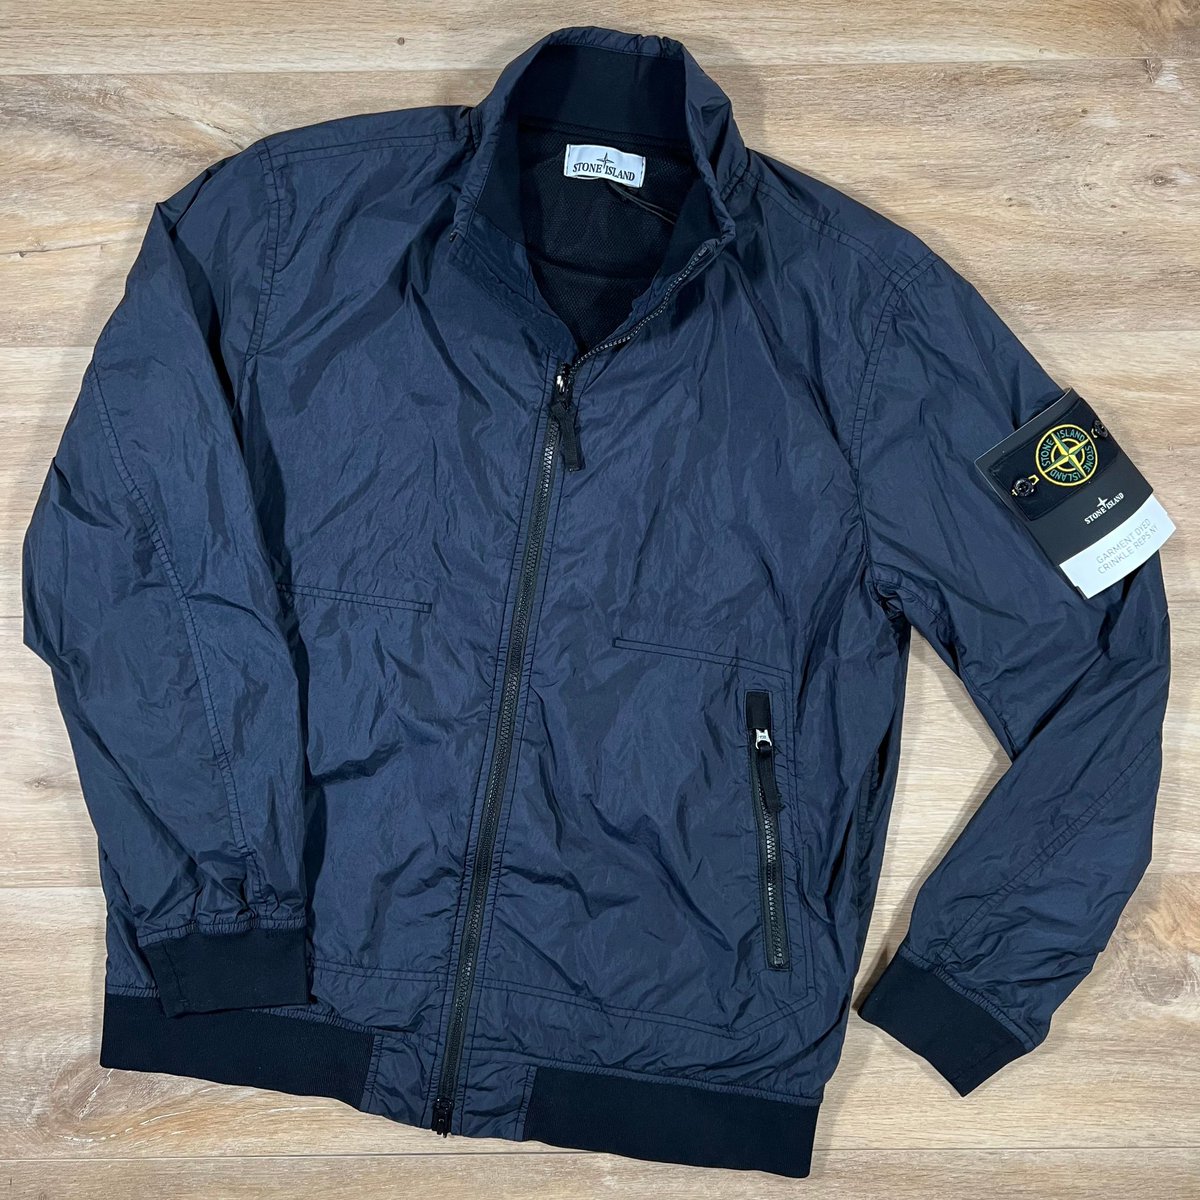 If Che Adams scores first vs Cyprus tonight, we’ll giveaway a Stone Island crinkle reps jacket in a size of your choice worth £600! 💙 Retweet & follow @LabelMenswear to enter